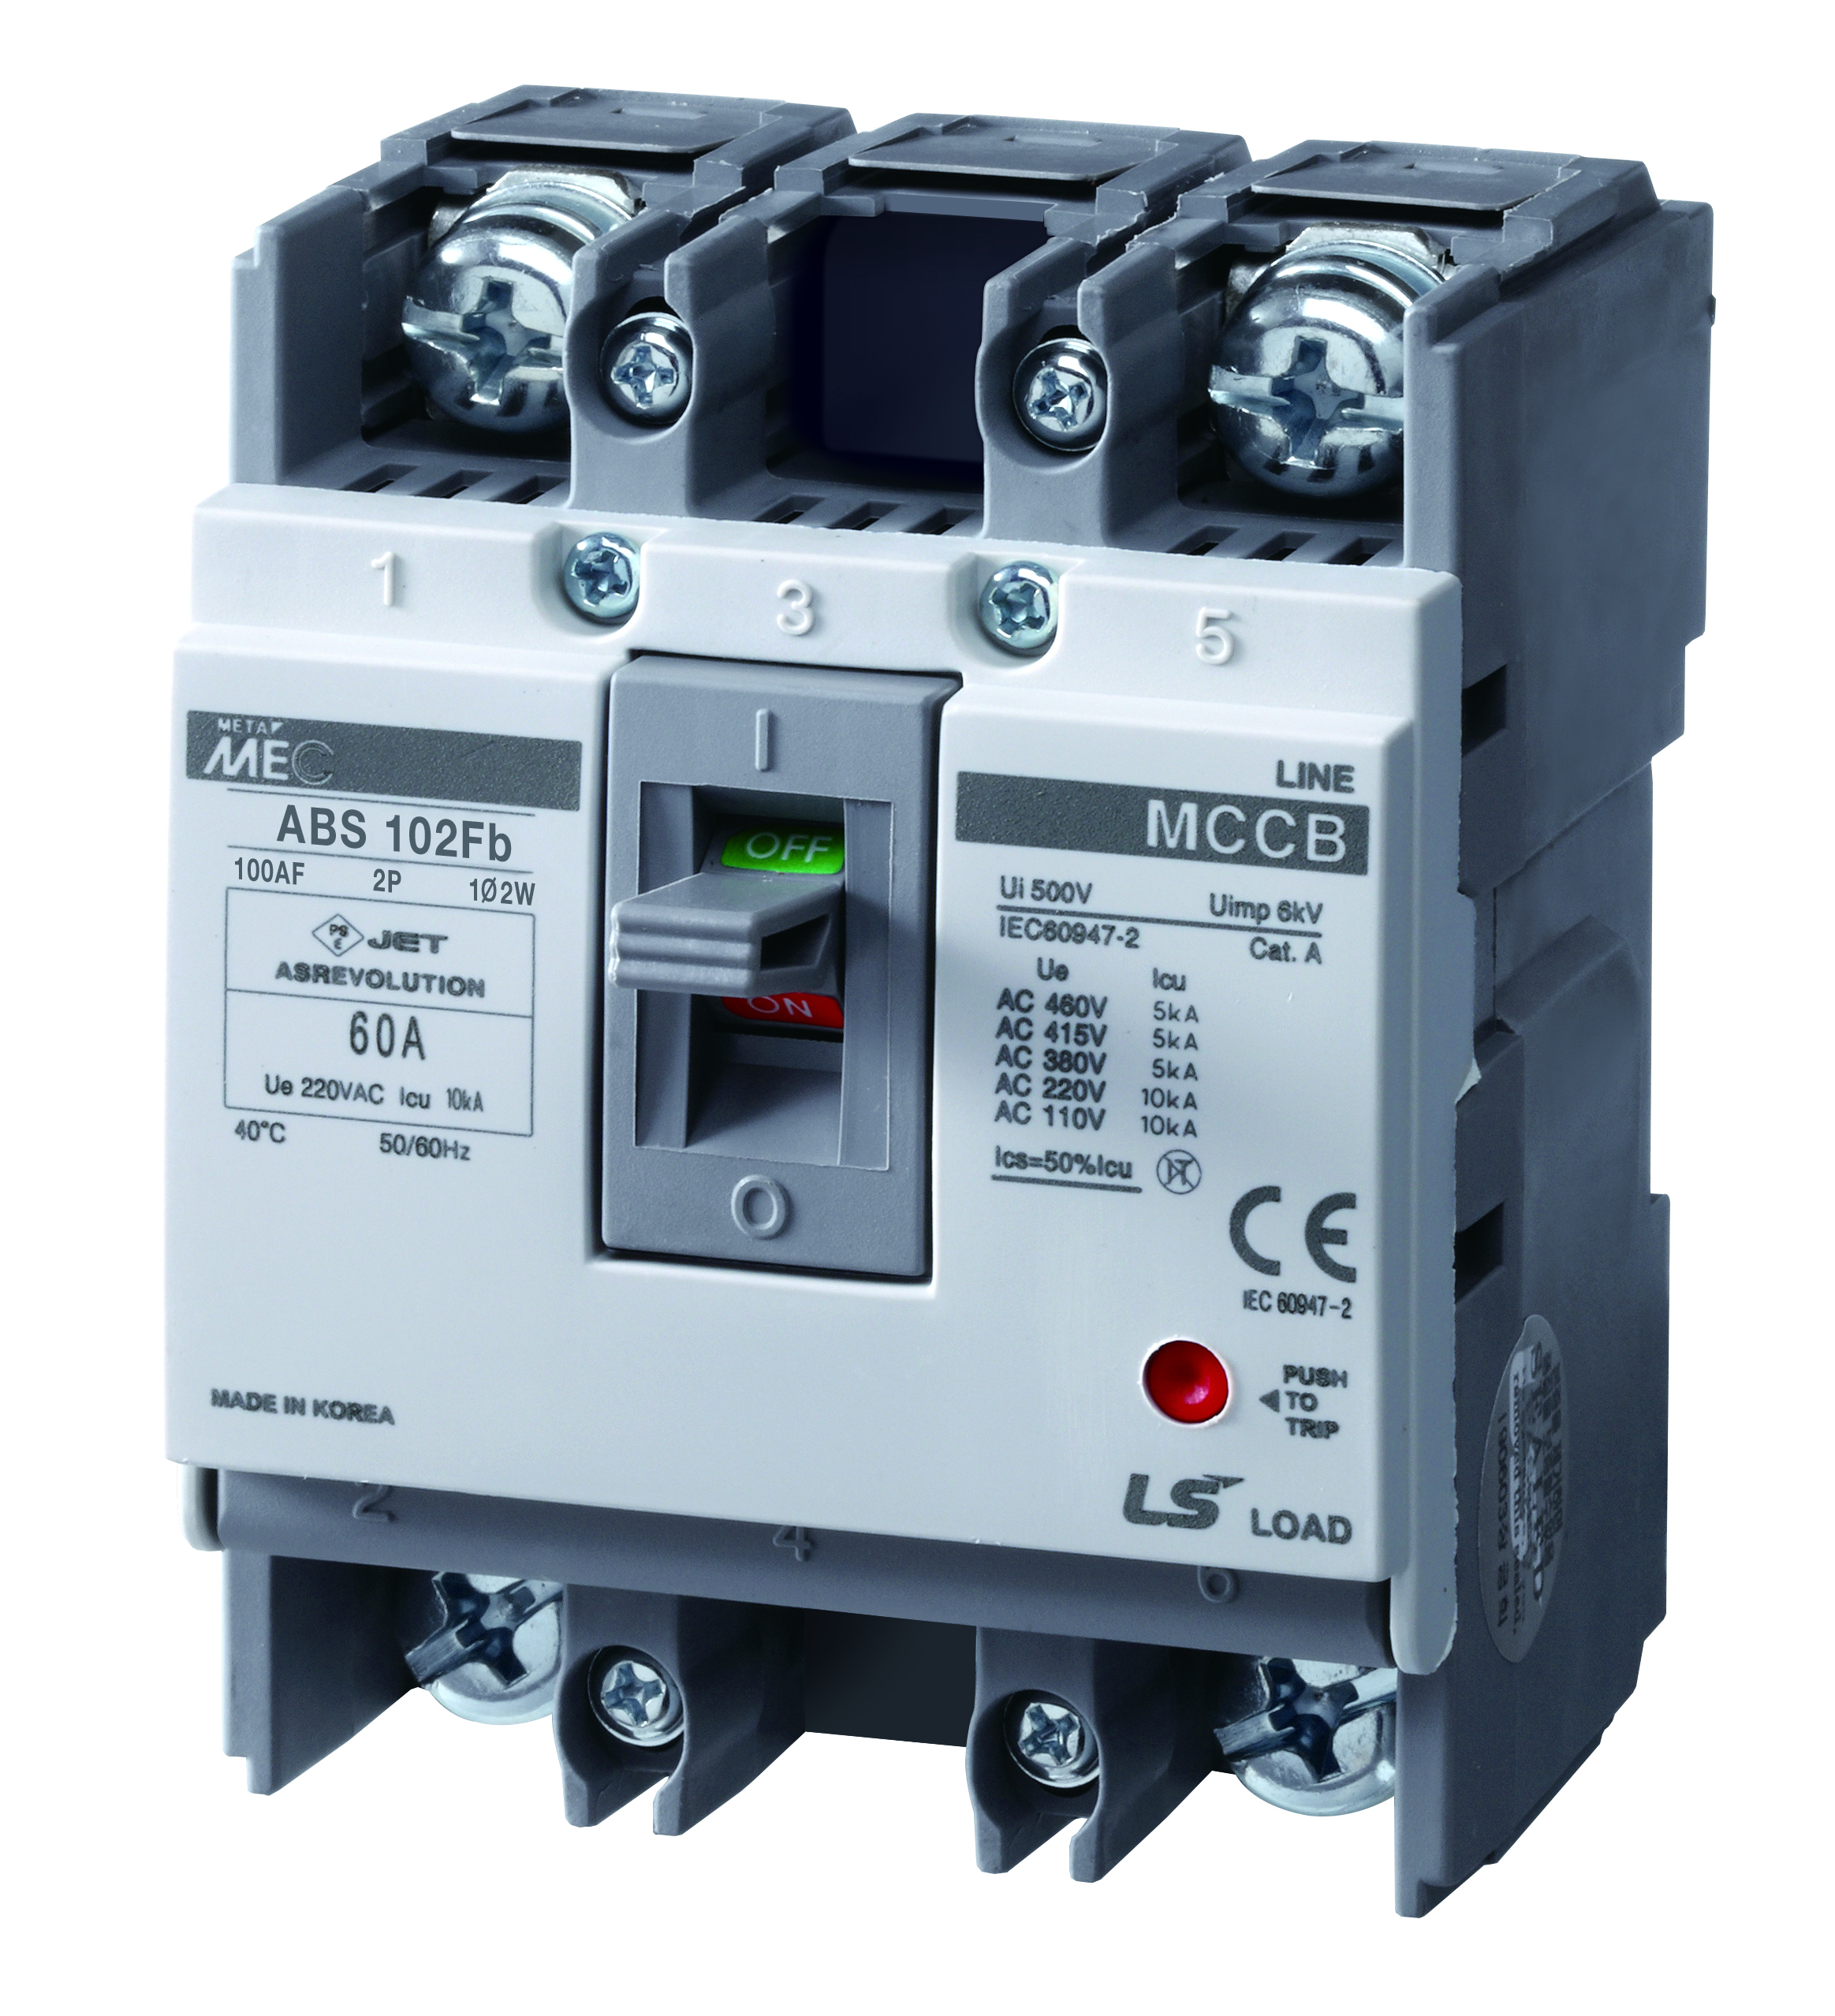 Molded Case Circuit Breakers - Fuseless, ABS Series, DIN Rail Mounting ABS52FB-40A